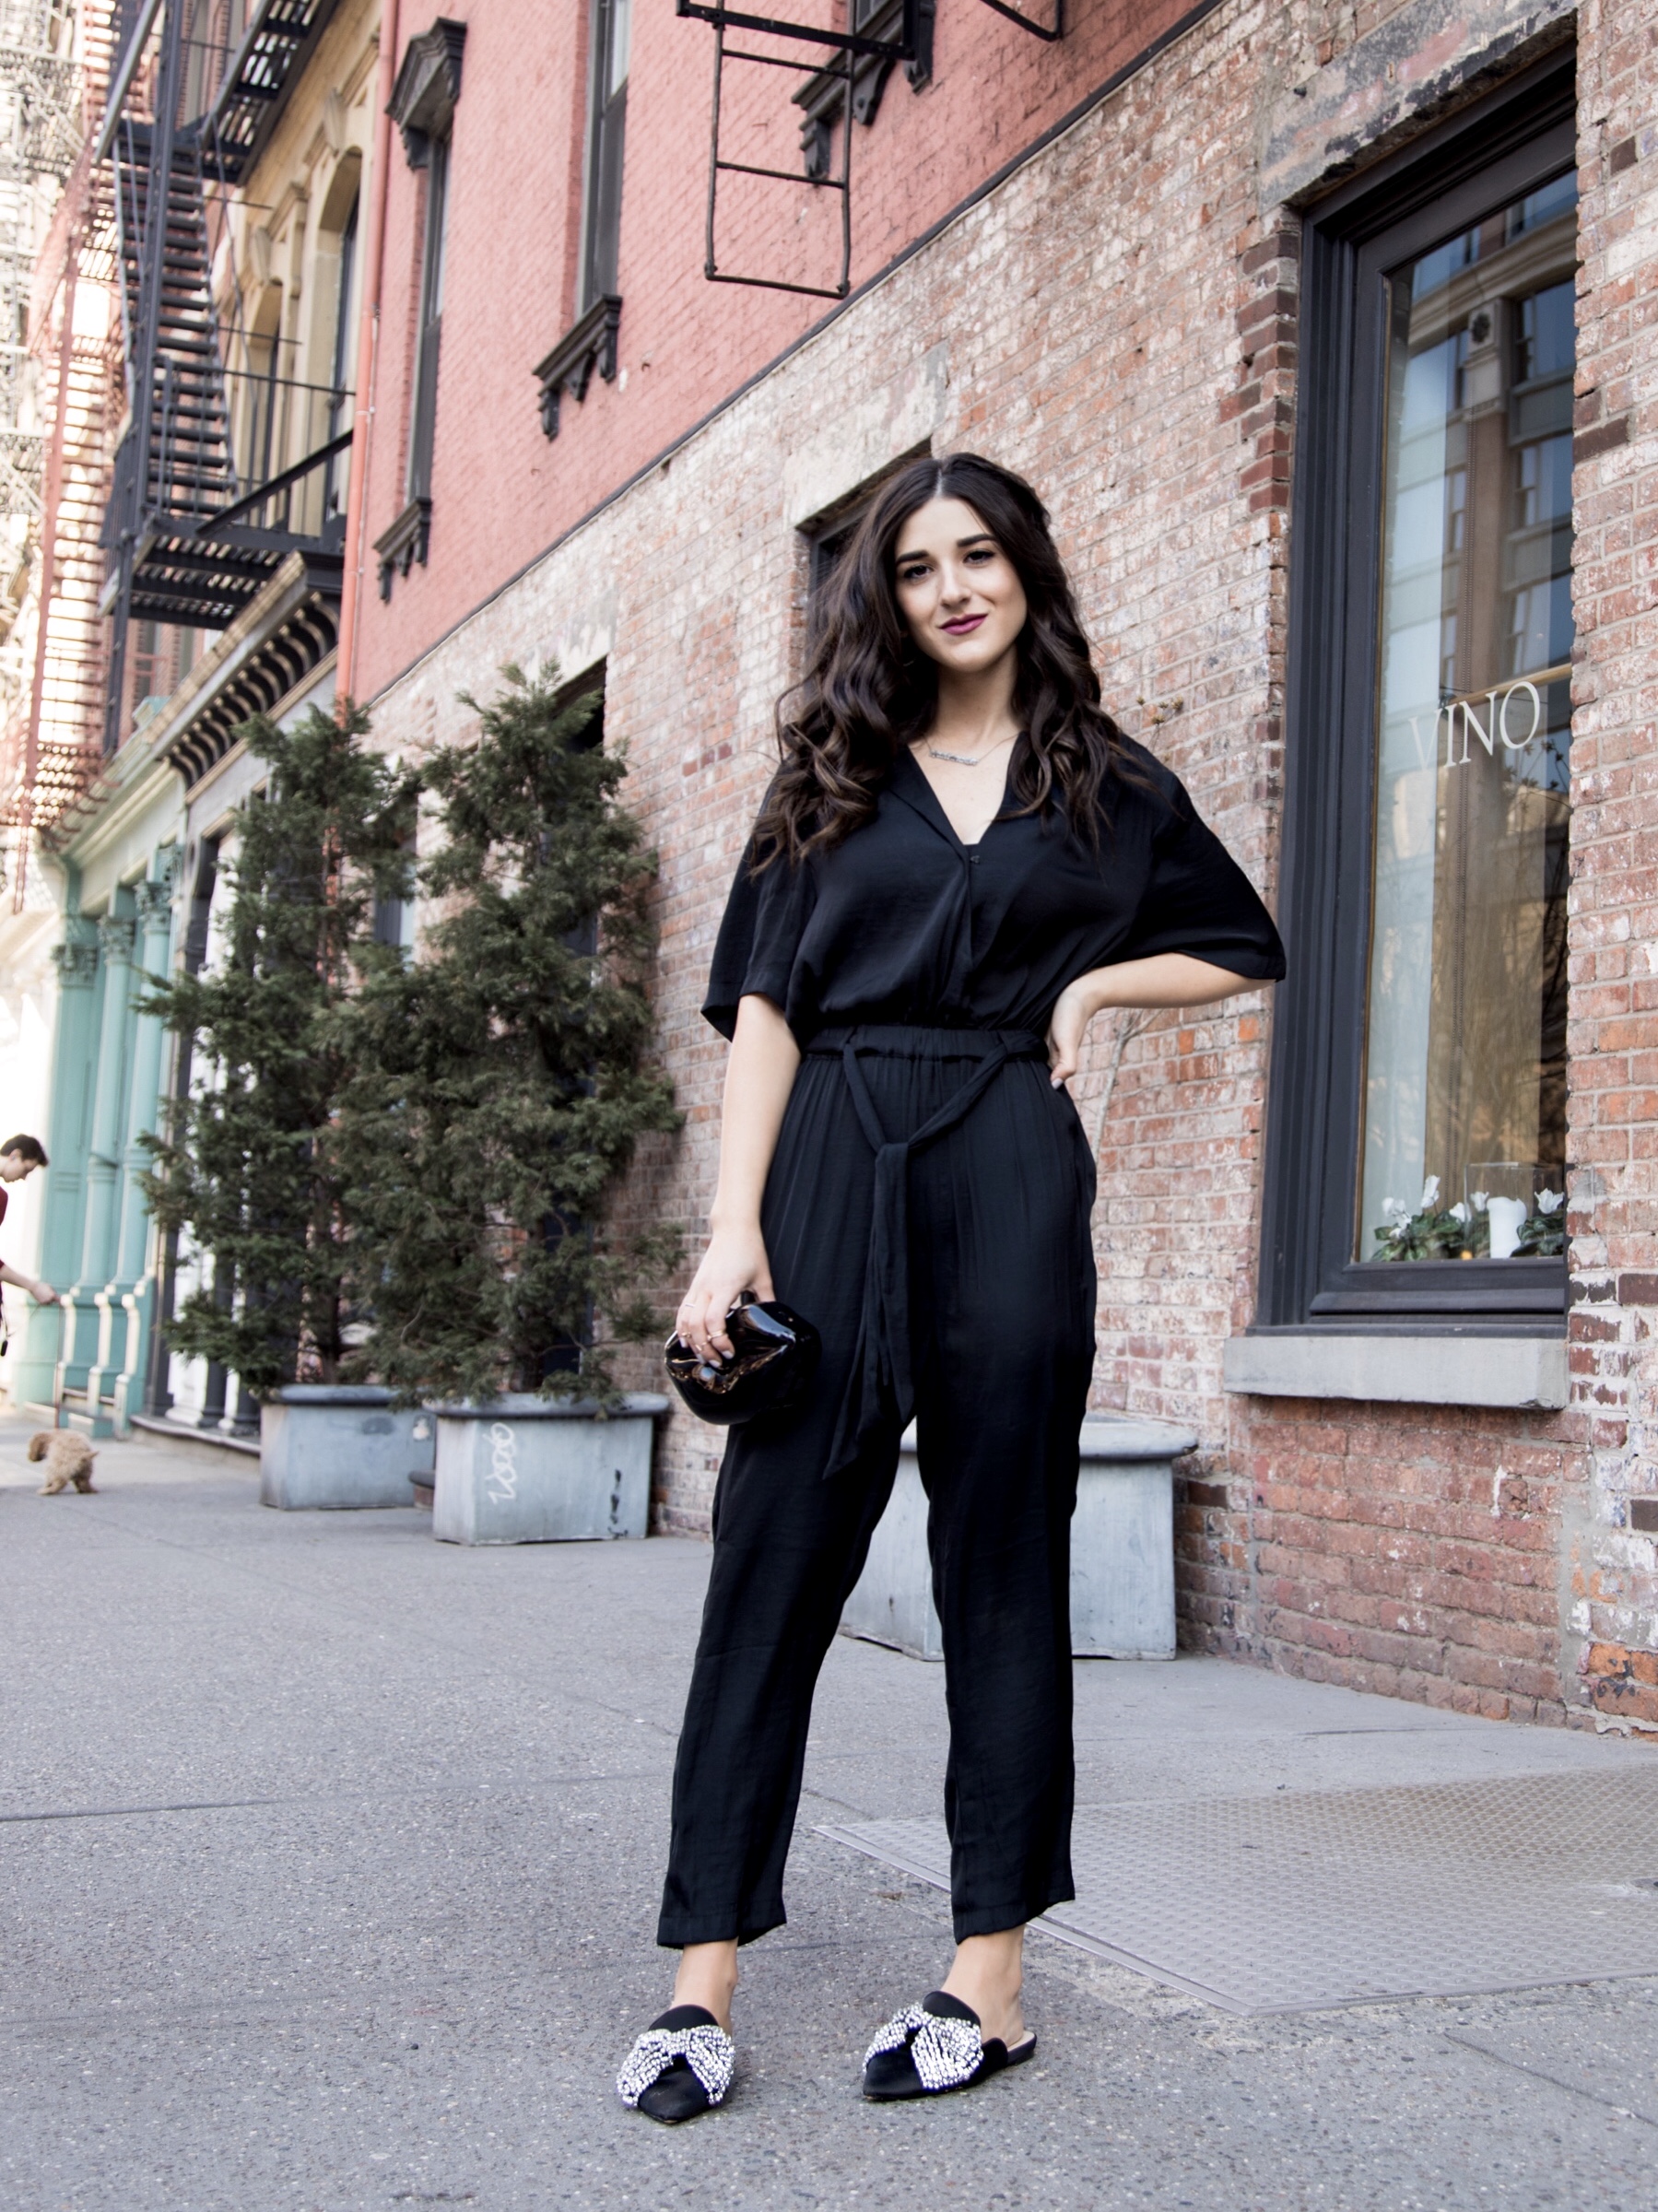 Where We're Going For Our Honeymoon // Black Silk Jumpsuit + Bow Mules —  Esther Santer